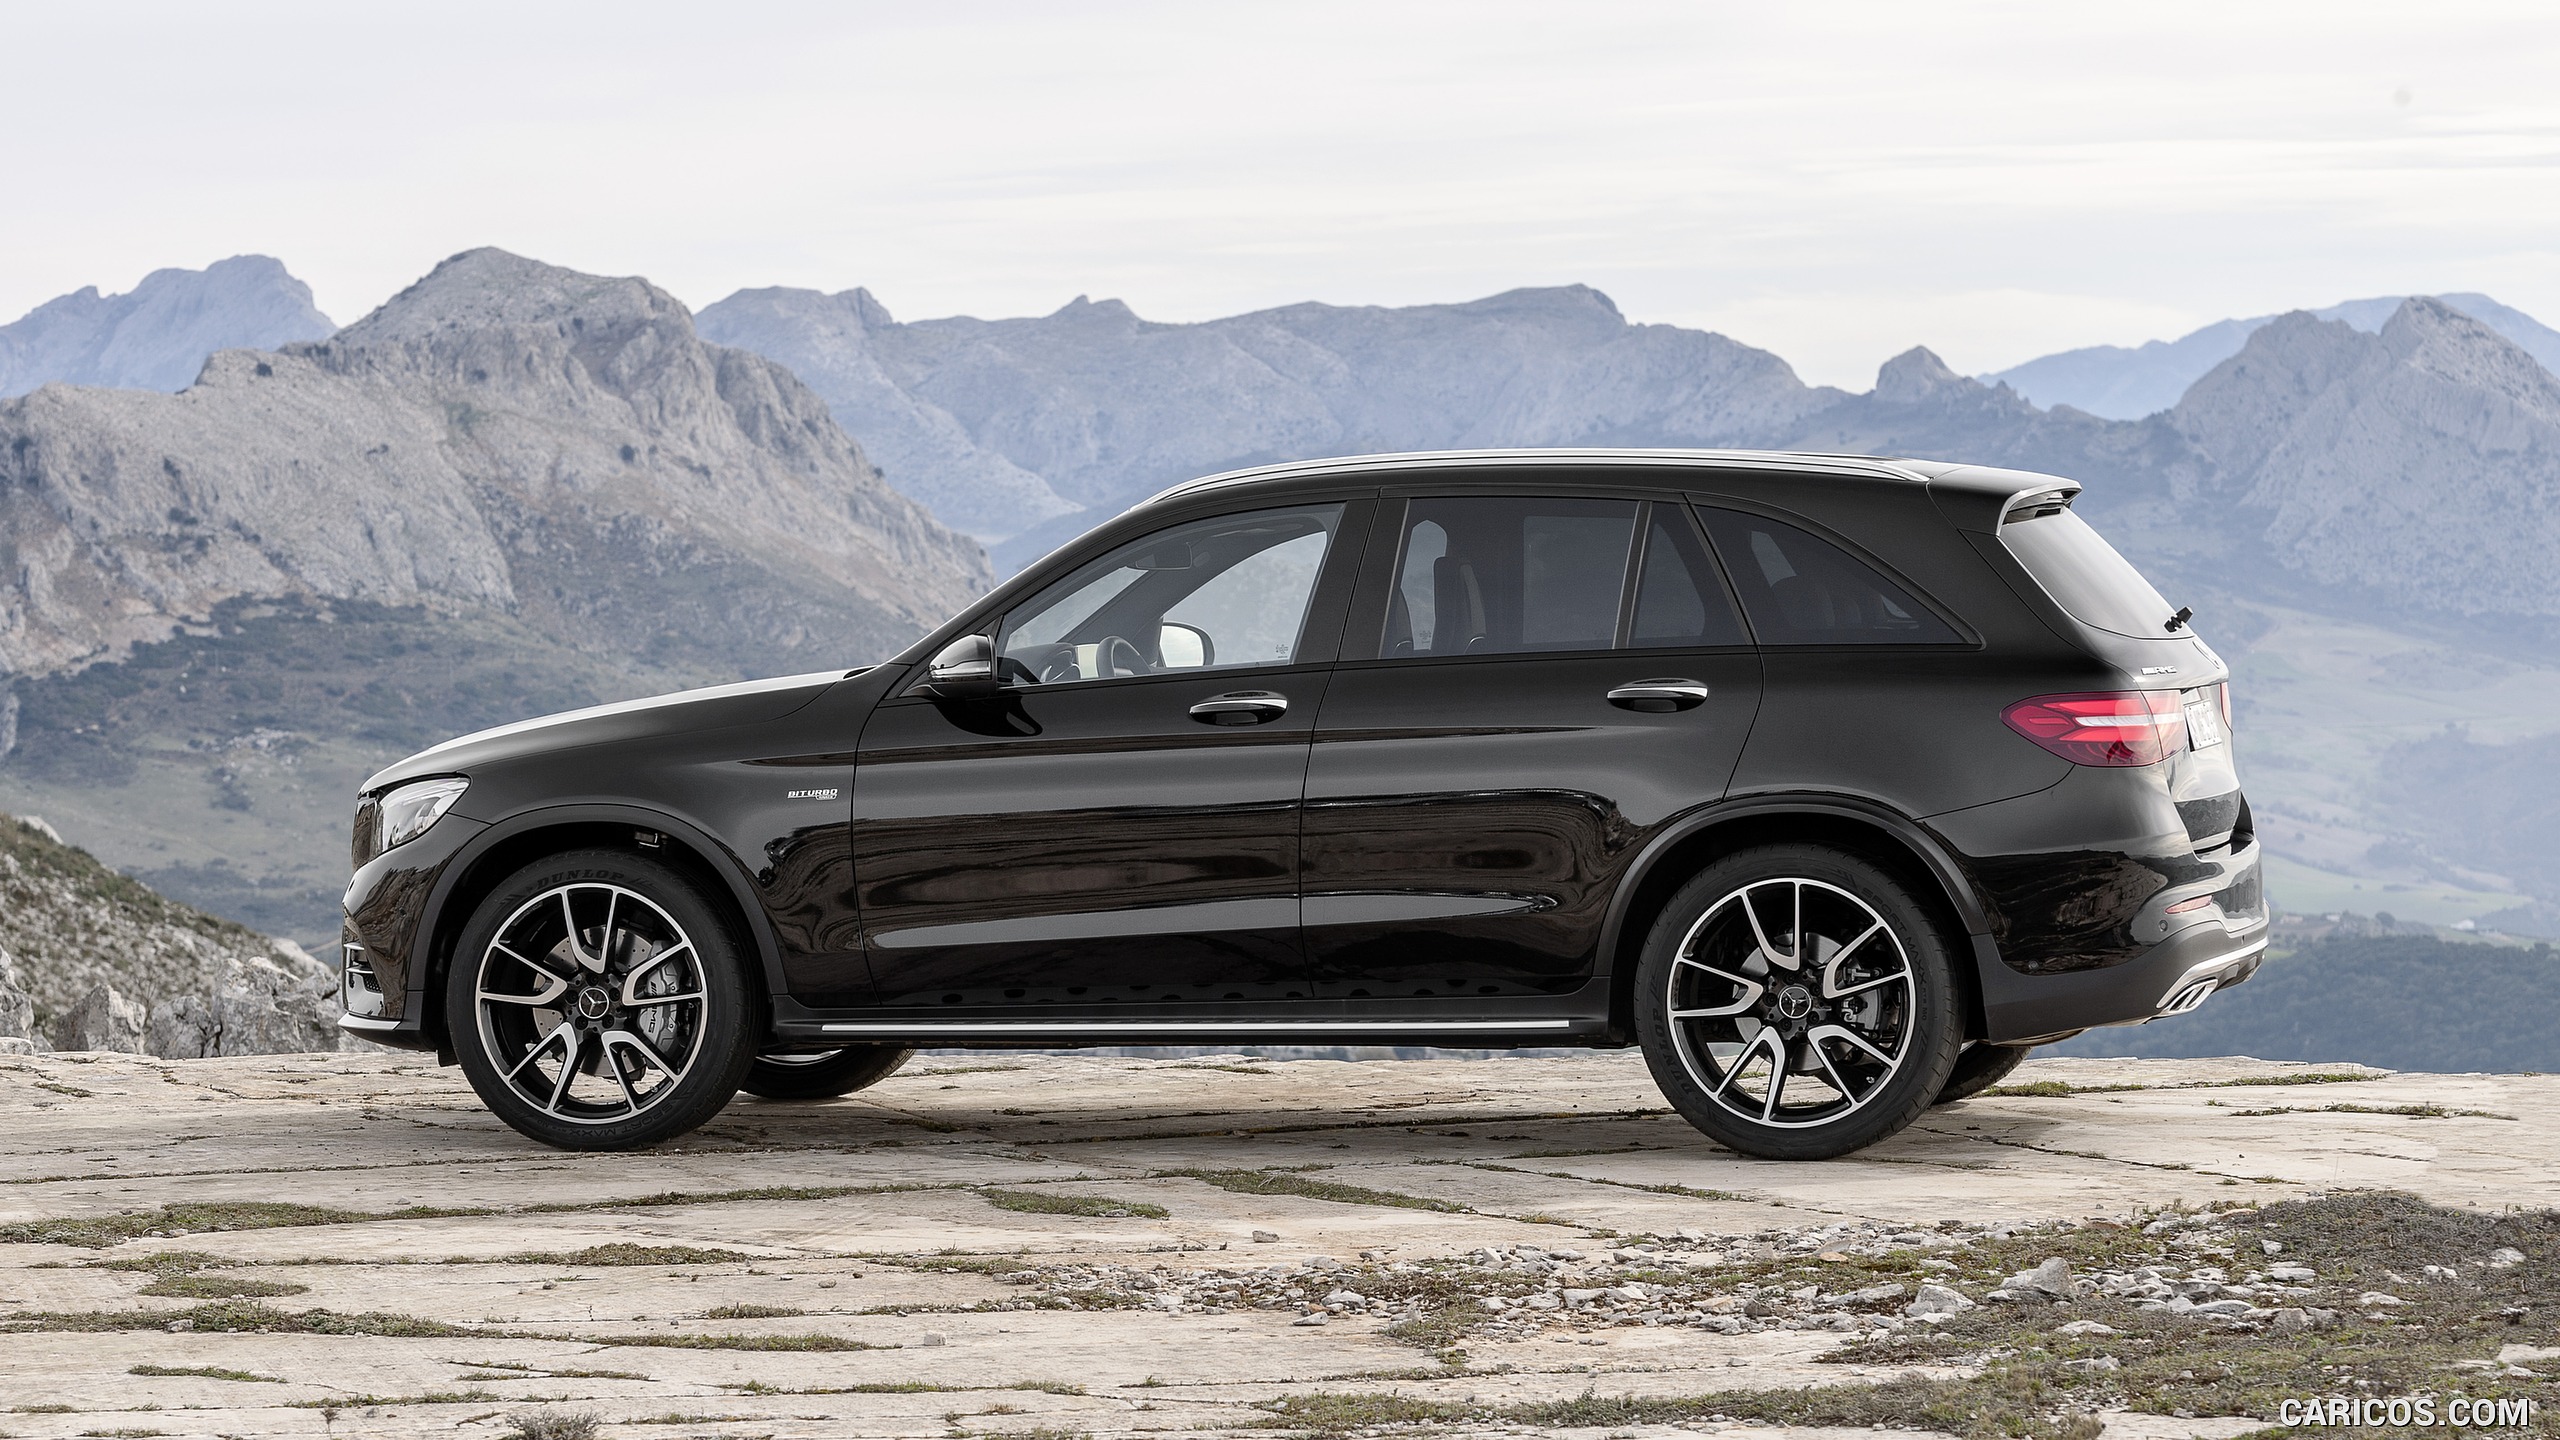 2017 Mercedes-AMG GLC 43 4MATIC (Chassis: X253, Color: Obsidian Black) - Side, #3 of 108